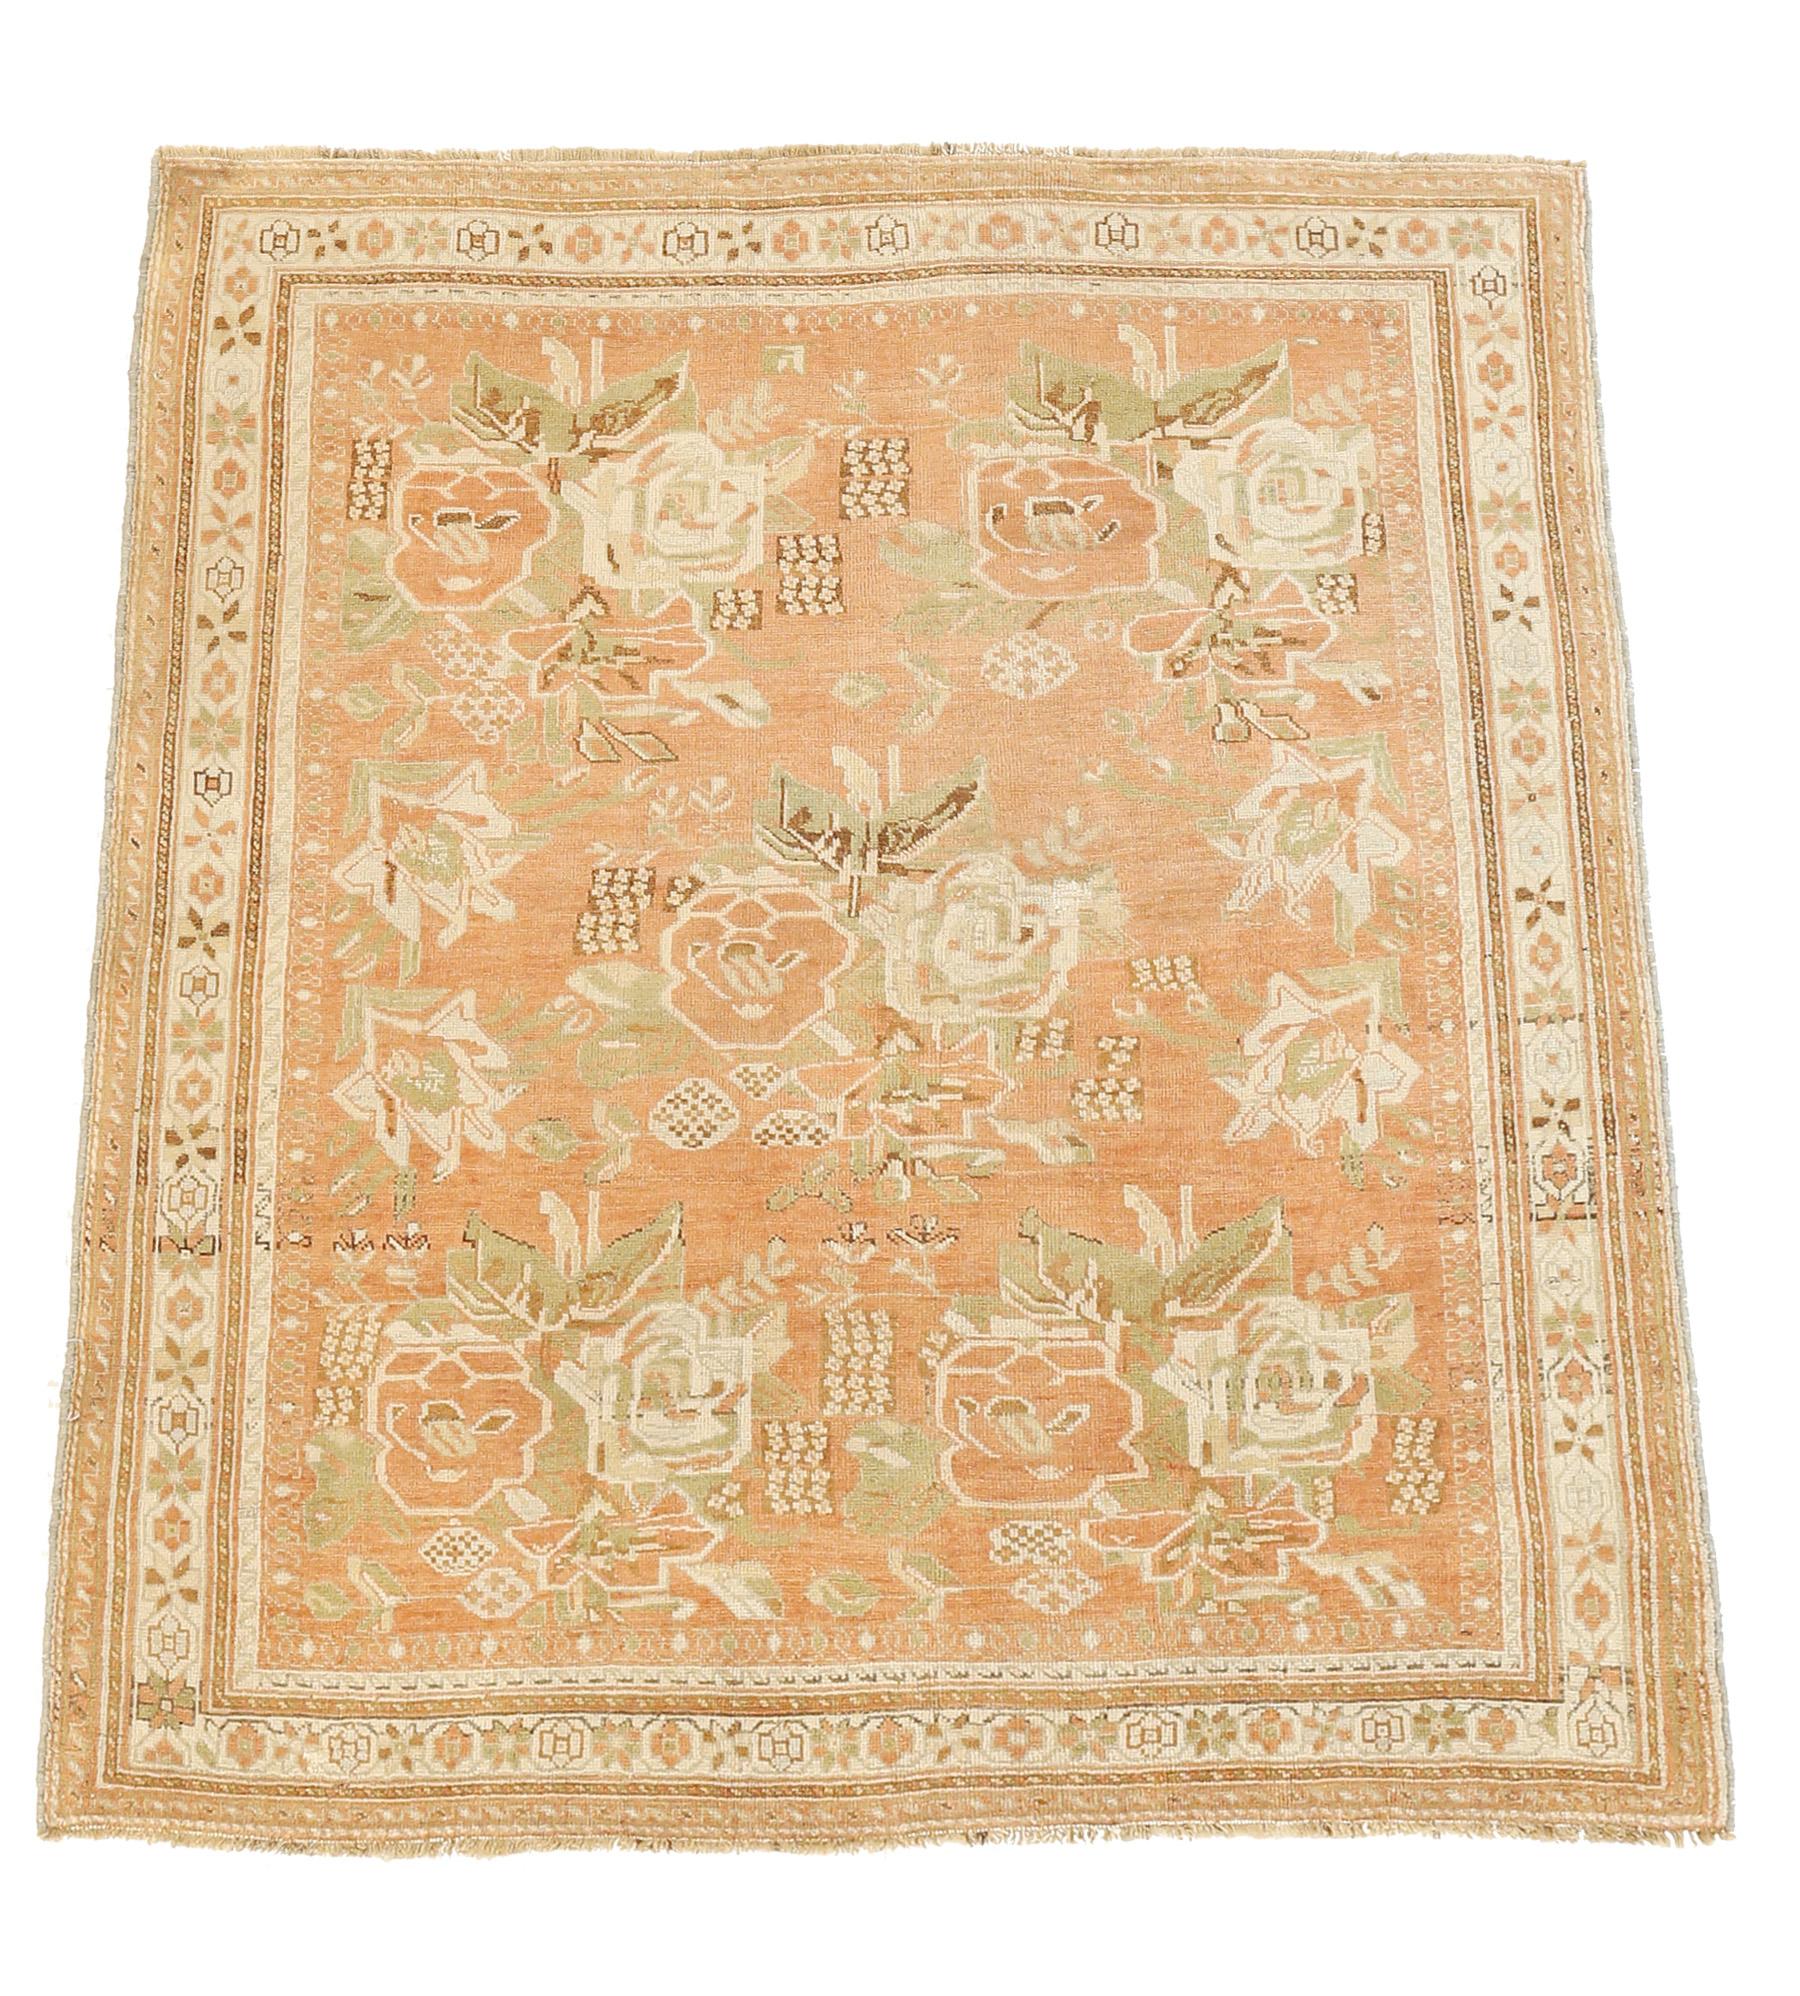 Antique Persian Sirjan rug handwoven from the finest sheep’s wool and colored with all-natural vegetable dyes that are safe for humans and pets. It’s a traditional Sirjan design featuring floral details in ivory and green over a pink field. It’s an